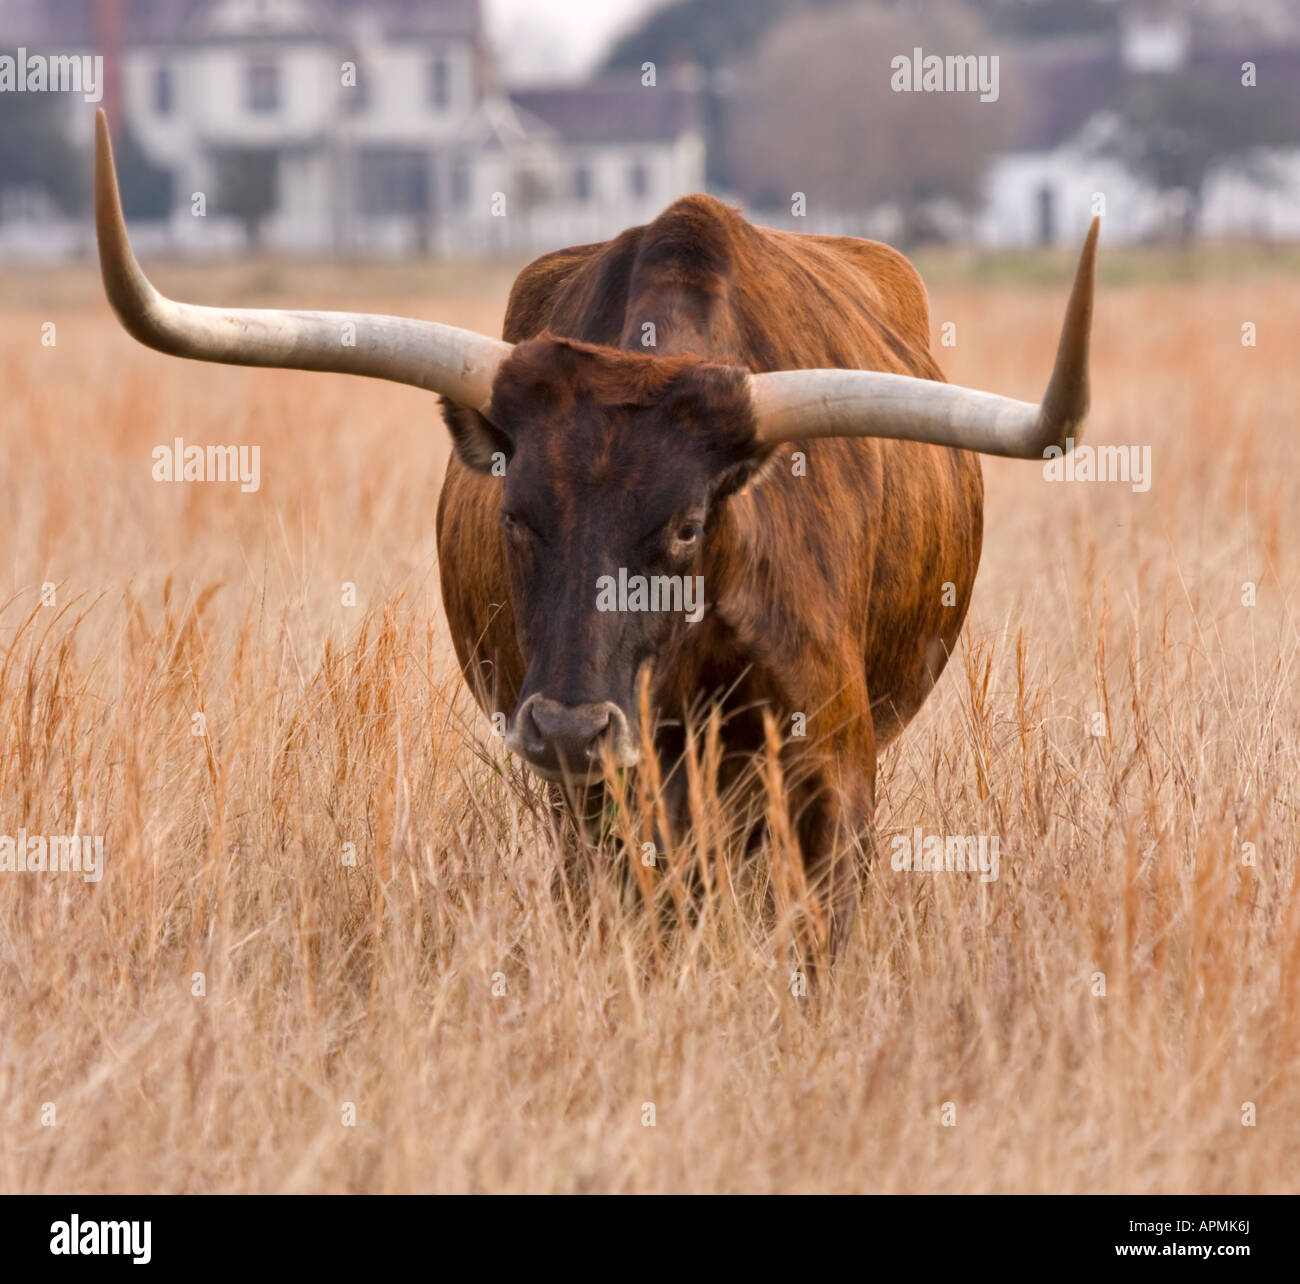 Texas longhorn in pascolo invernale Foto Stock